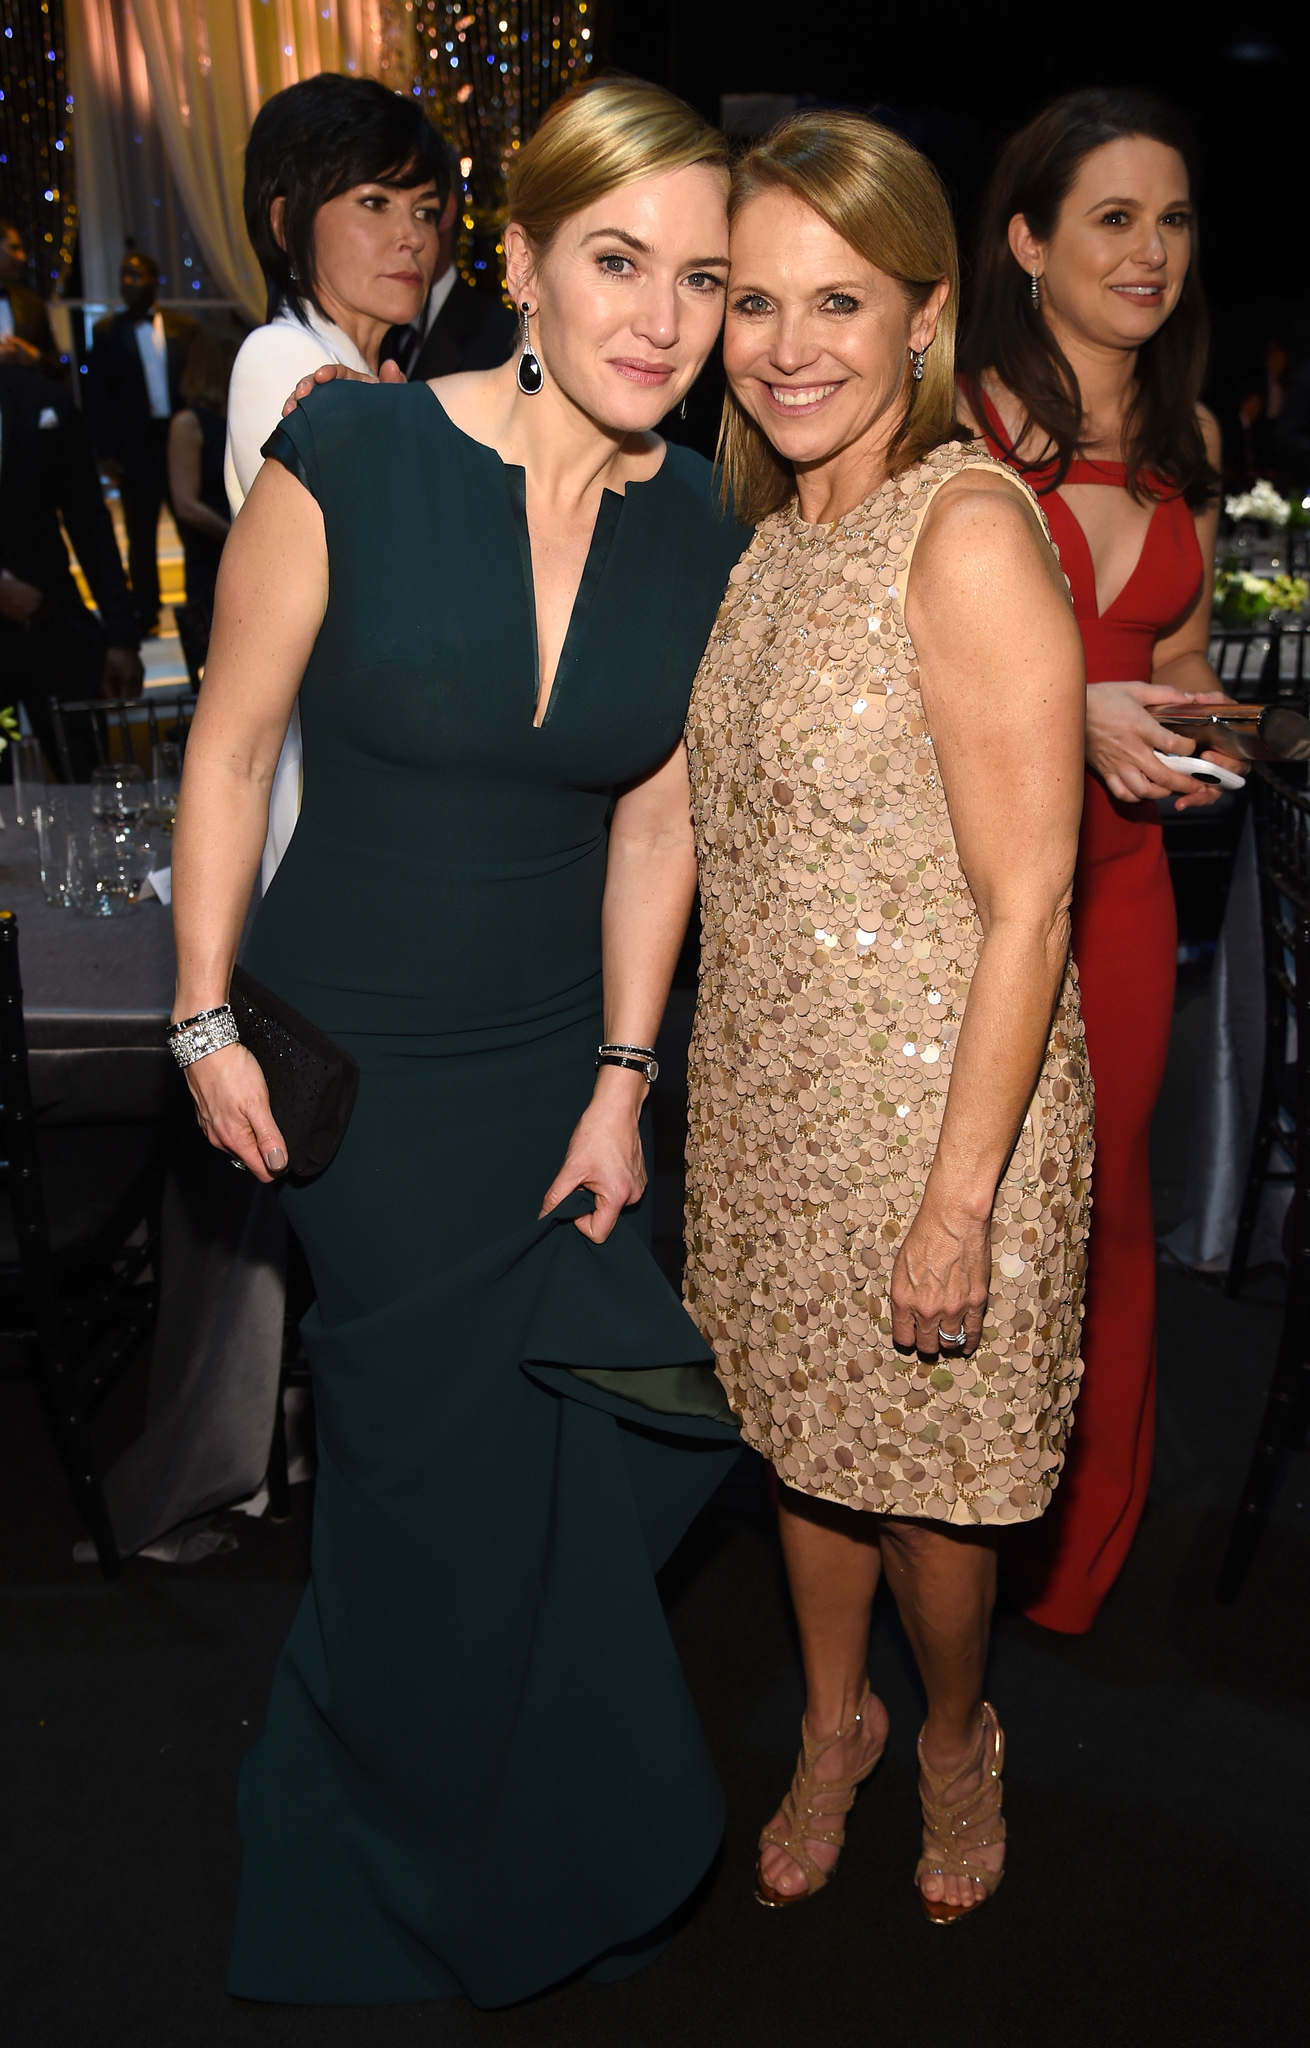 Kate Winslet and Katie Couric